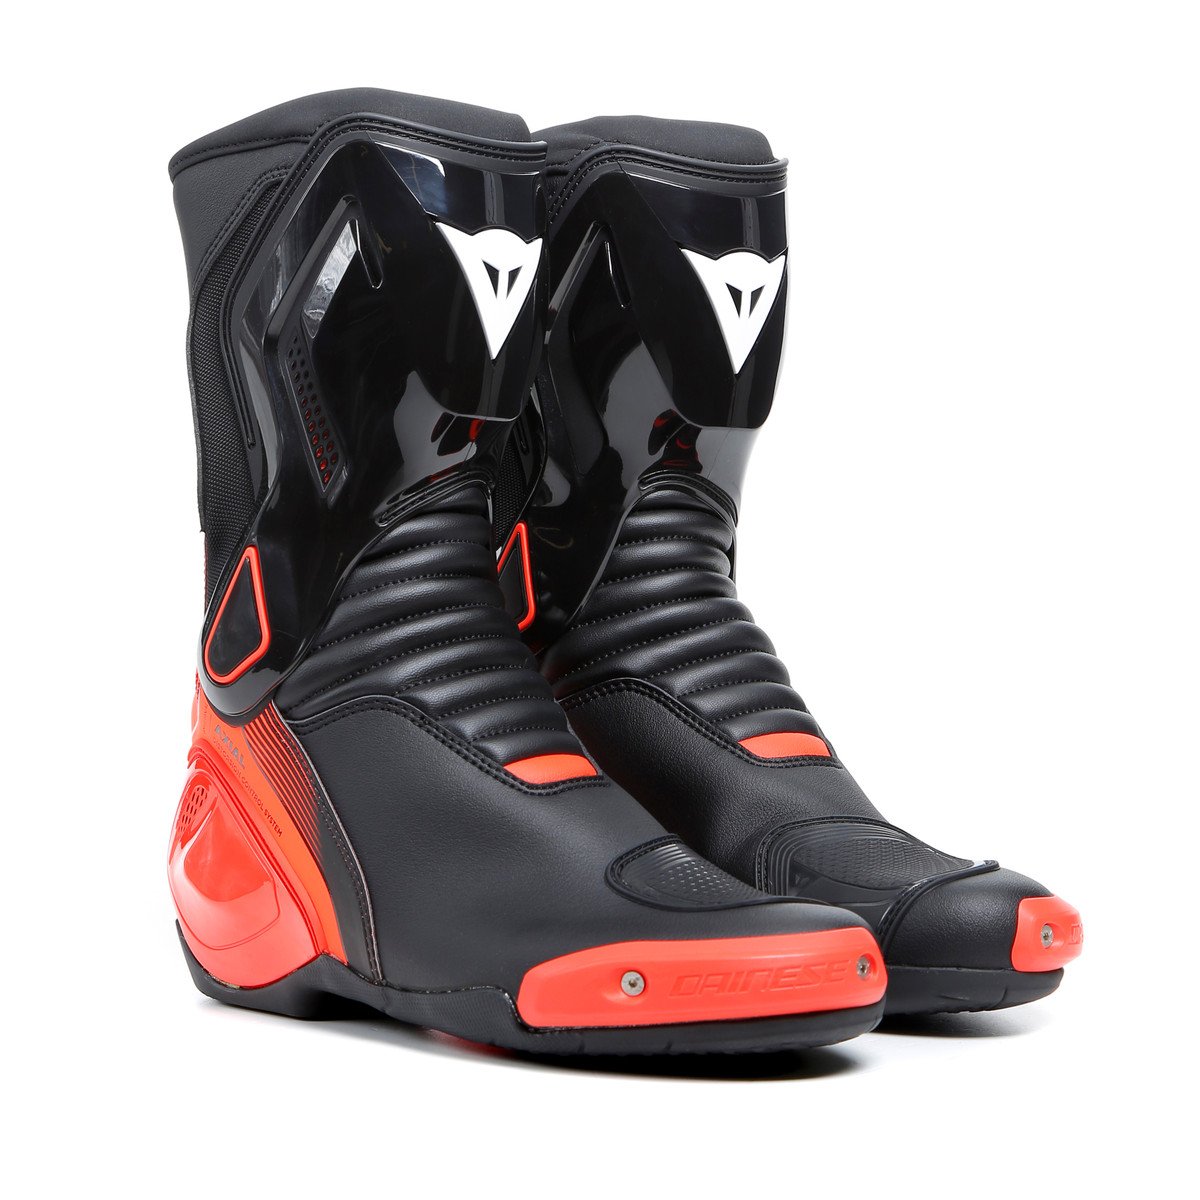 Image of Dainese Nexus 2 Boots Black Fluo Red Size 40 EN